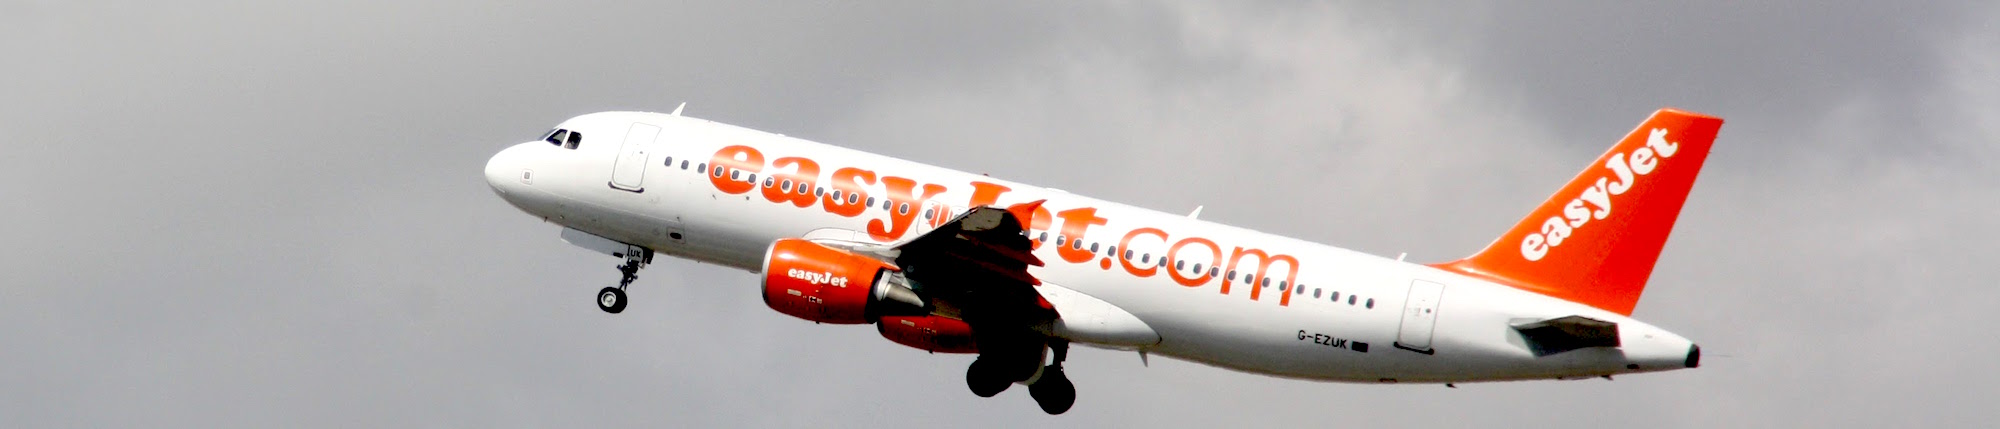 Best time to book flights for Paris (CDG) to Palermo (PMO) flights with EasyJet at AirHint